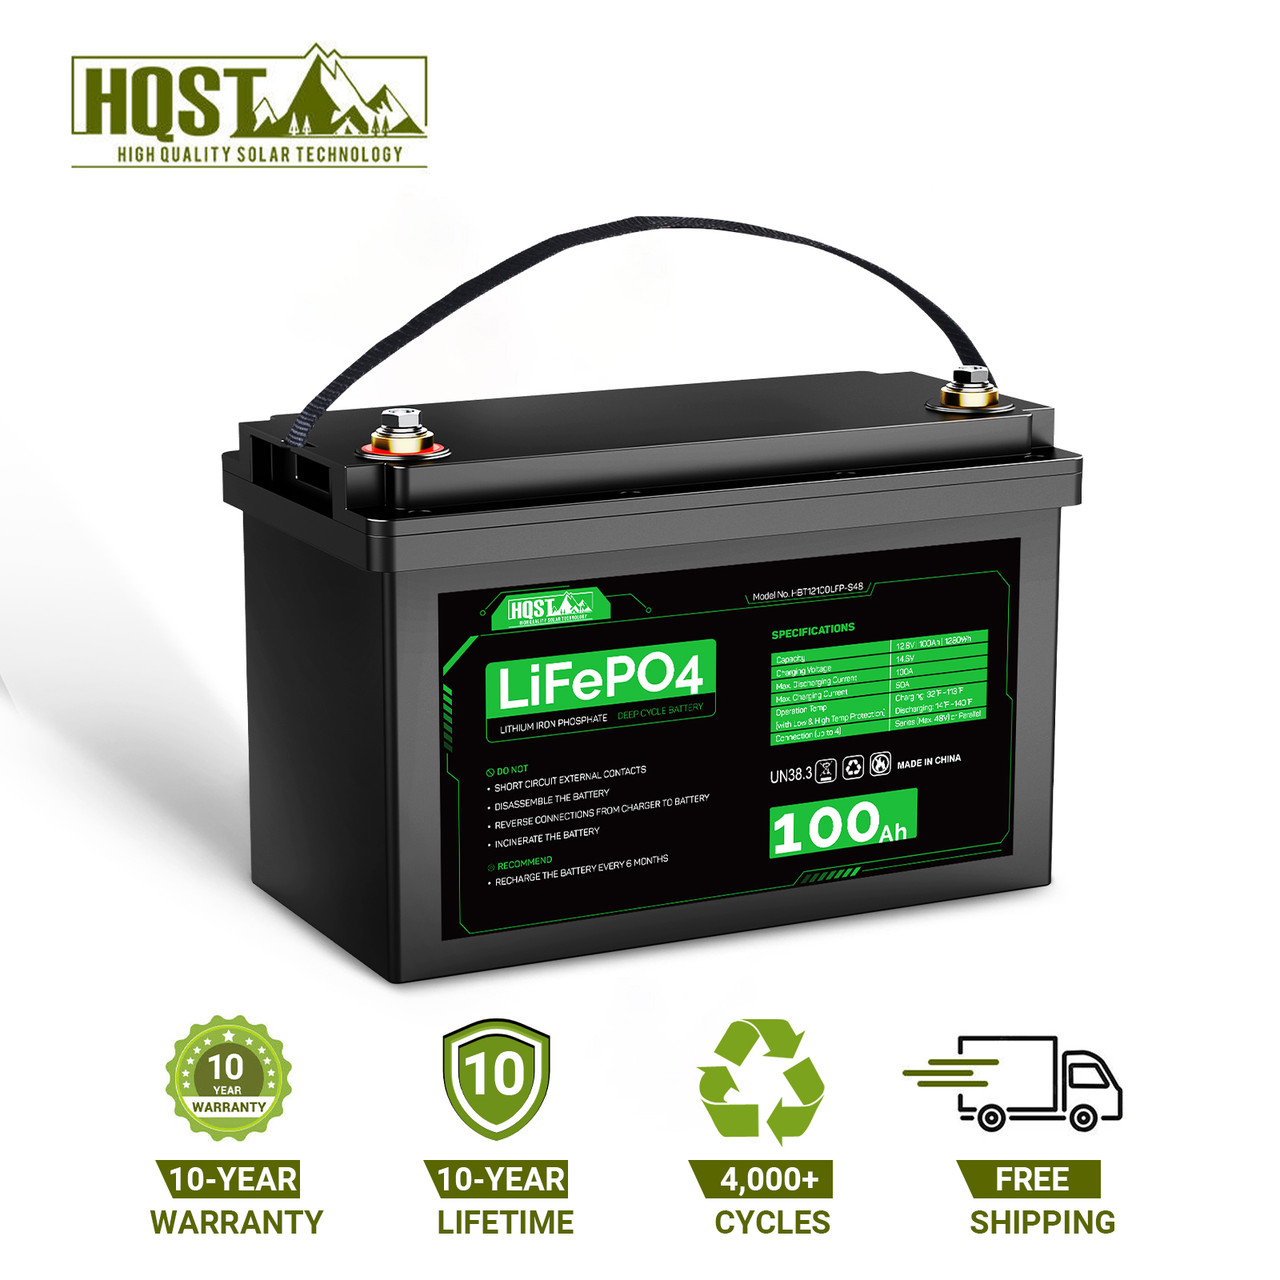 HQST 12 Volt 100Ah LiFePO4 Lithium Iron Phosphate Battery, Built-in  Optimized BMS with Low & High Temp Protection, Series and Parallel  Connection, for RVs, Boats, Solar System